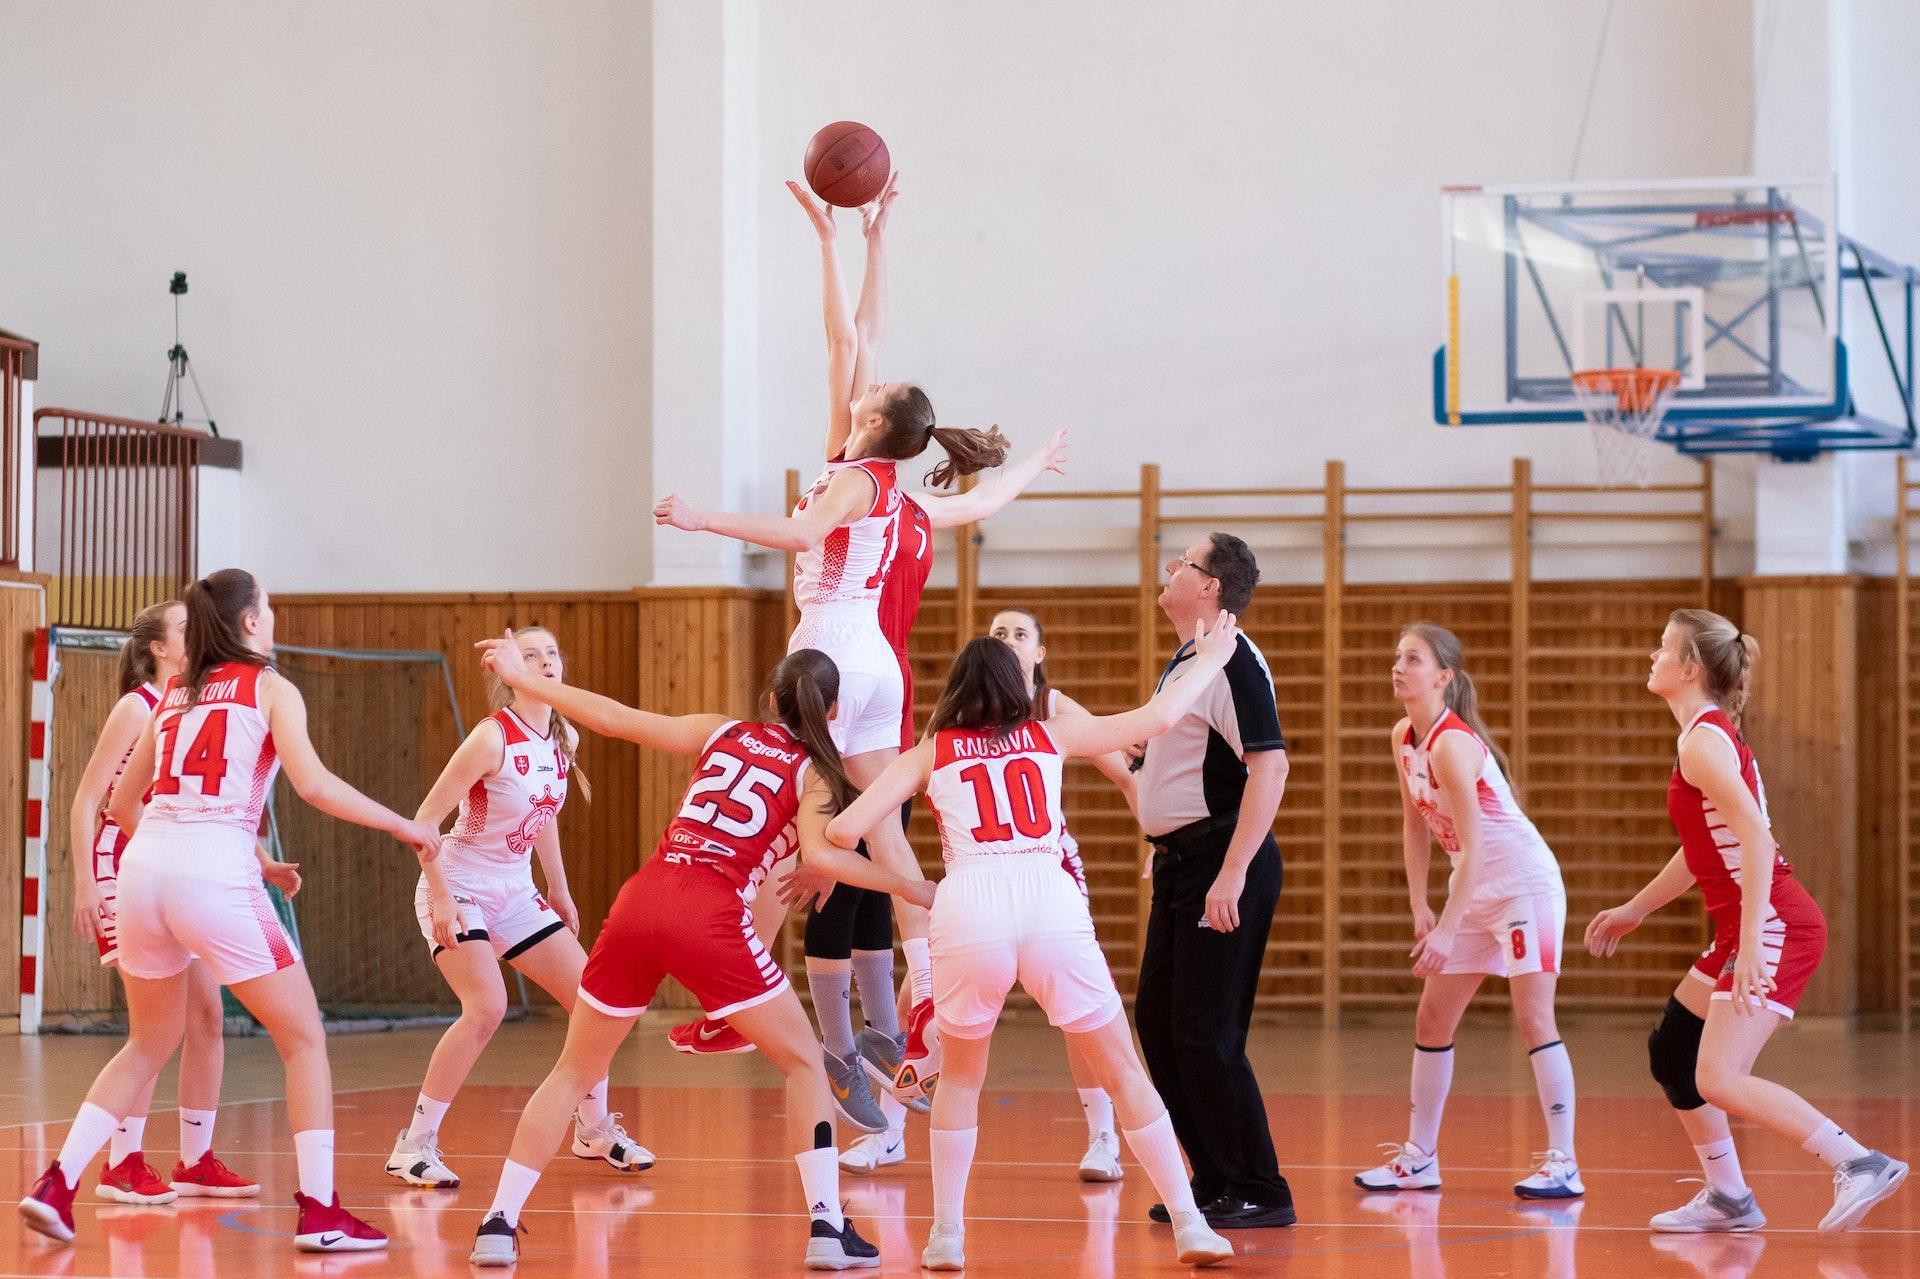 Women in Red and White Jerseys Playing Basketball